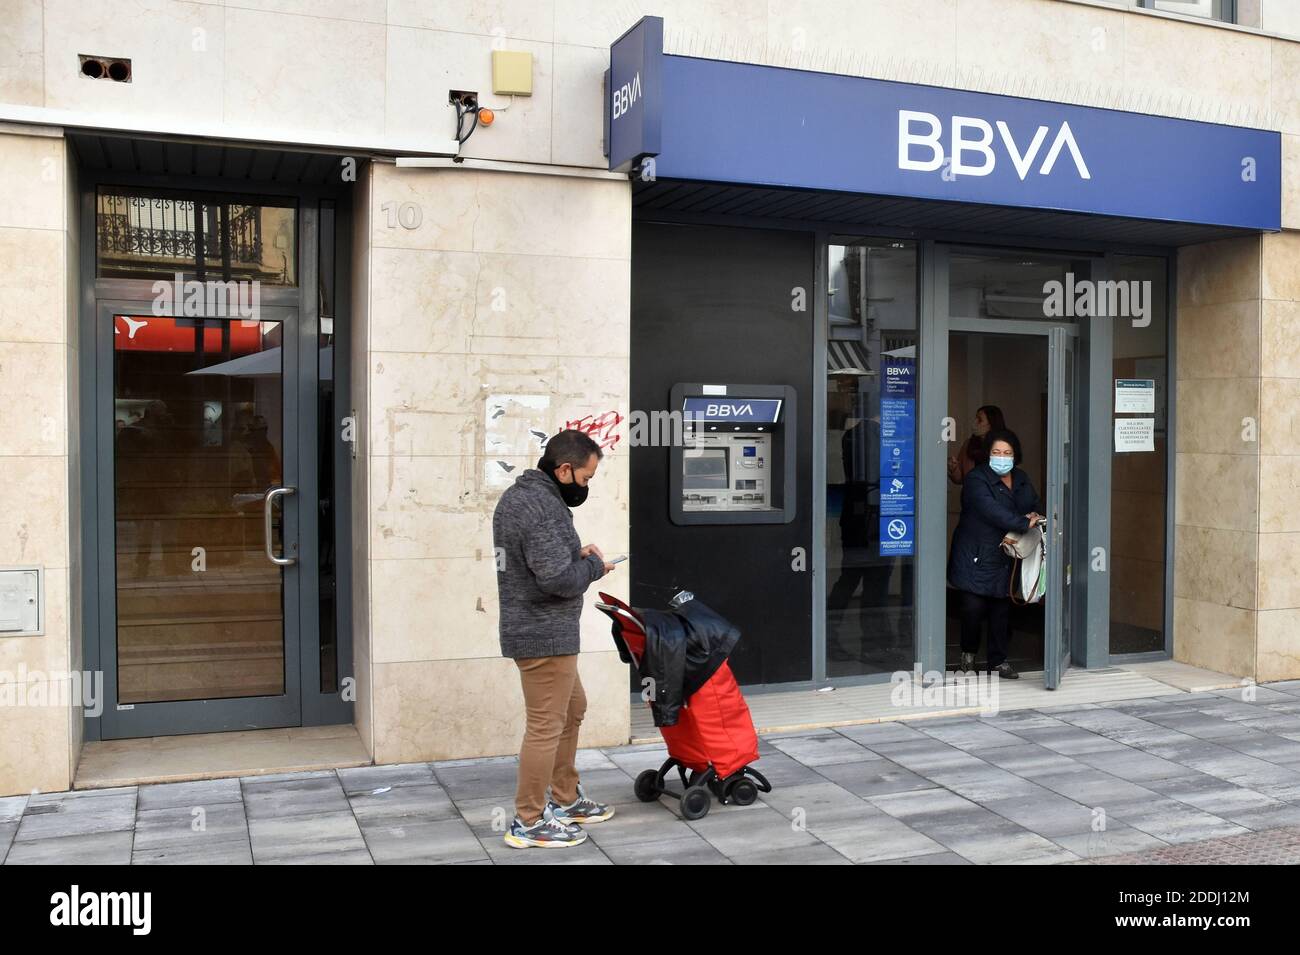 Vendrell, Catalonia, Spain. 20th Mar, 2020. A man waits at a social distance to enter a bank branch of the BBVA bank in Vendrell Tarragona.The merging of BBVA (Bank Bilbao Vizcaya Argentaria) and Sabadell Bank would create the second banking giant of almost 600,000 million in the Spanish market by volume of assets, only behind the entity that resulted from the merging of CaixaBank and Bankia. Credit: Ramon Costa/SOPA Images/ZUMA Wire/Alamy Live News Stock Photo